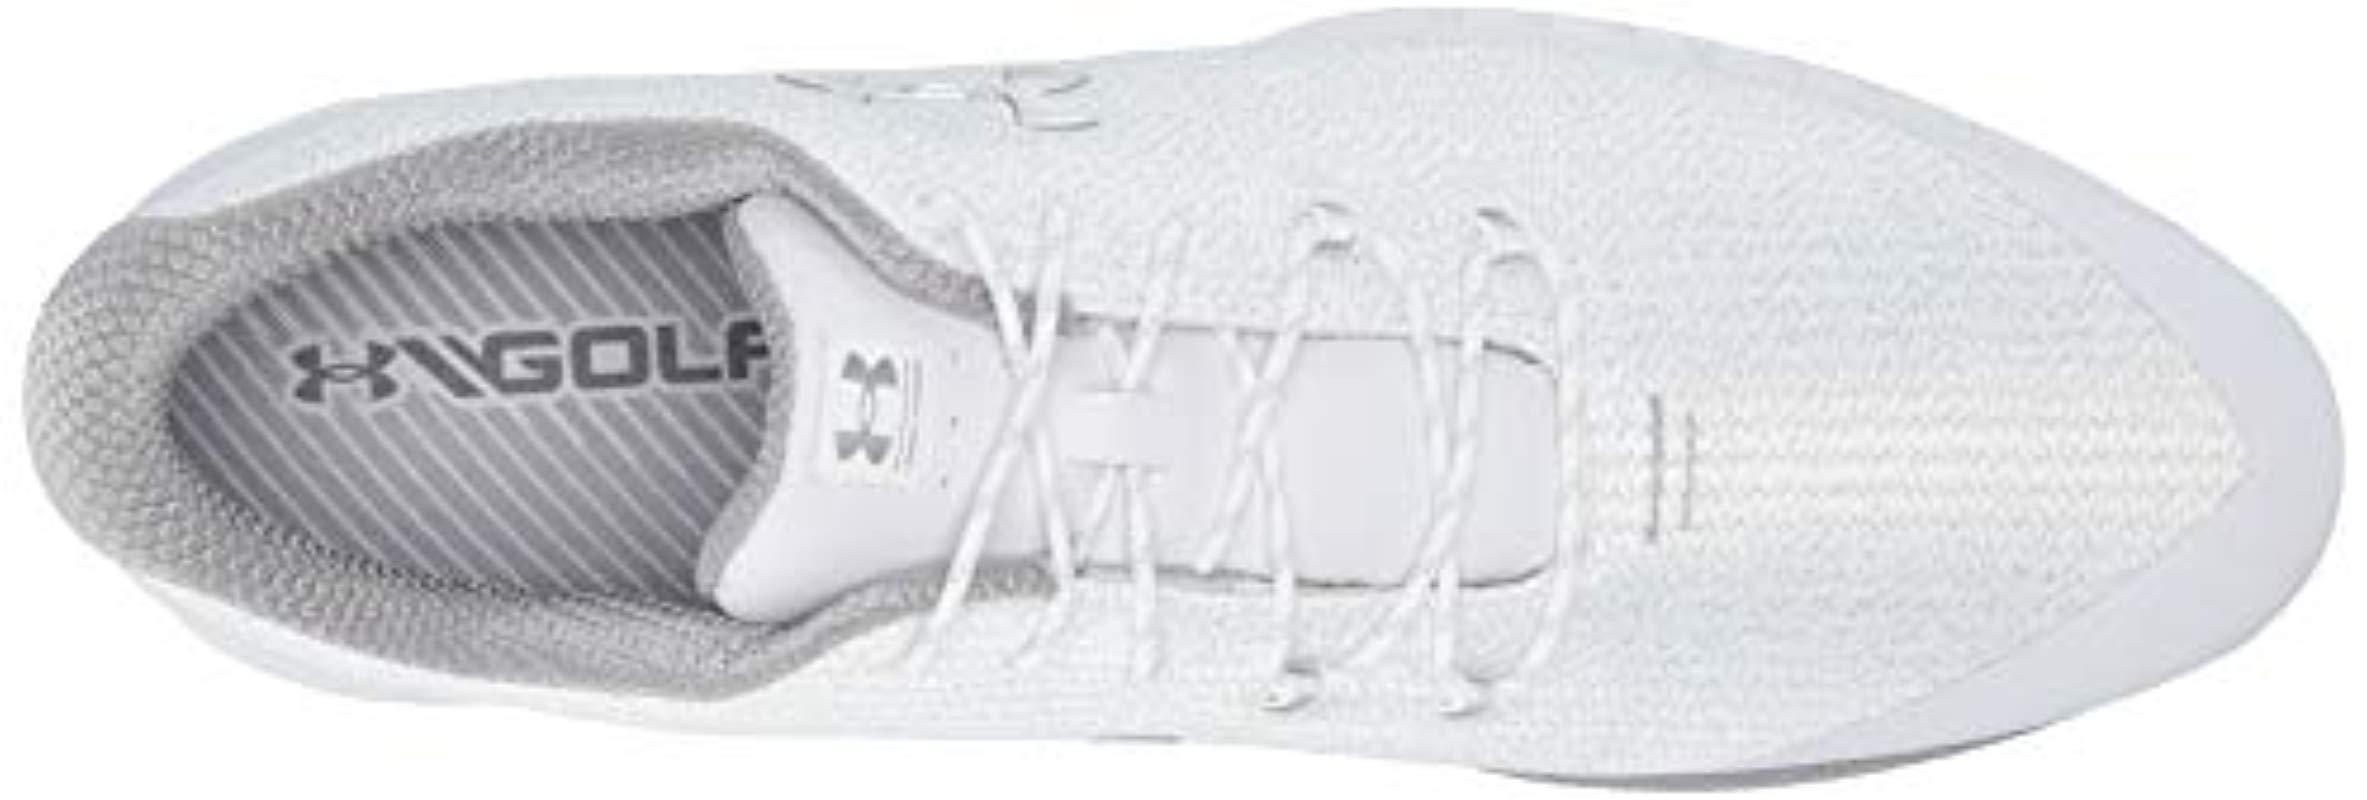 Under Armour Hovr Drive Woven Golf Shoe 